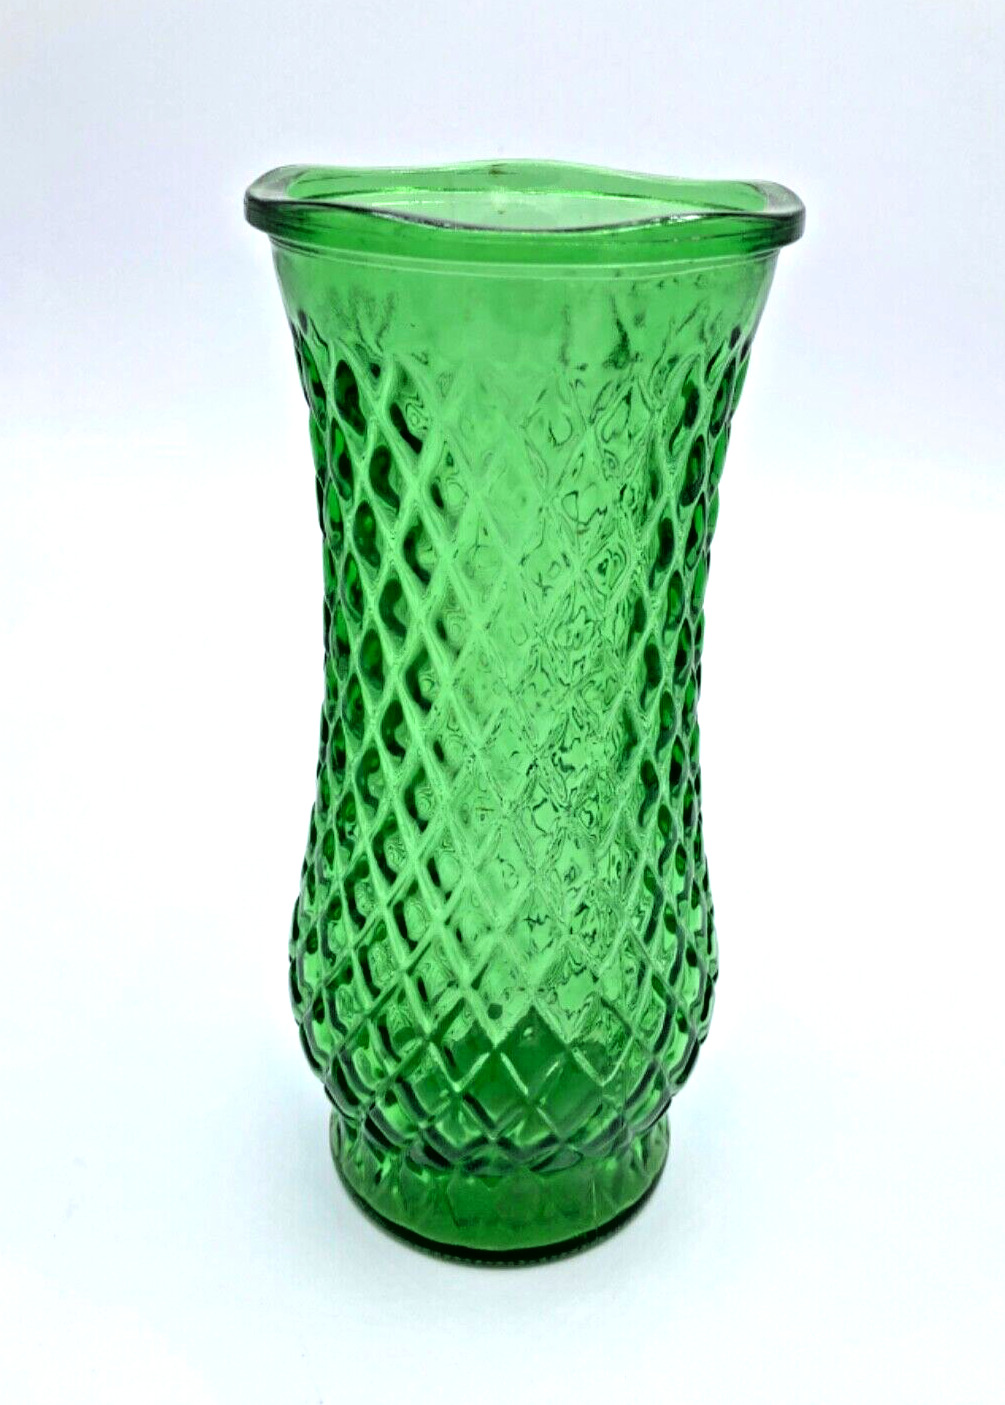 Emerald Green glass vase with ruffled edge vintage era fits all decor styles